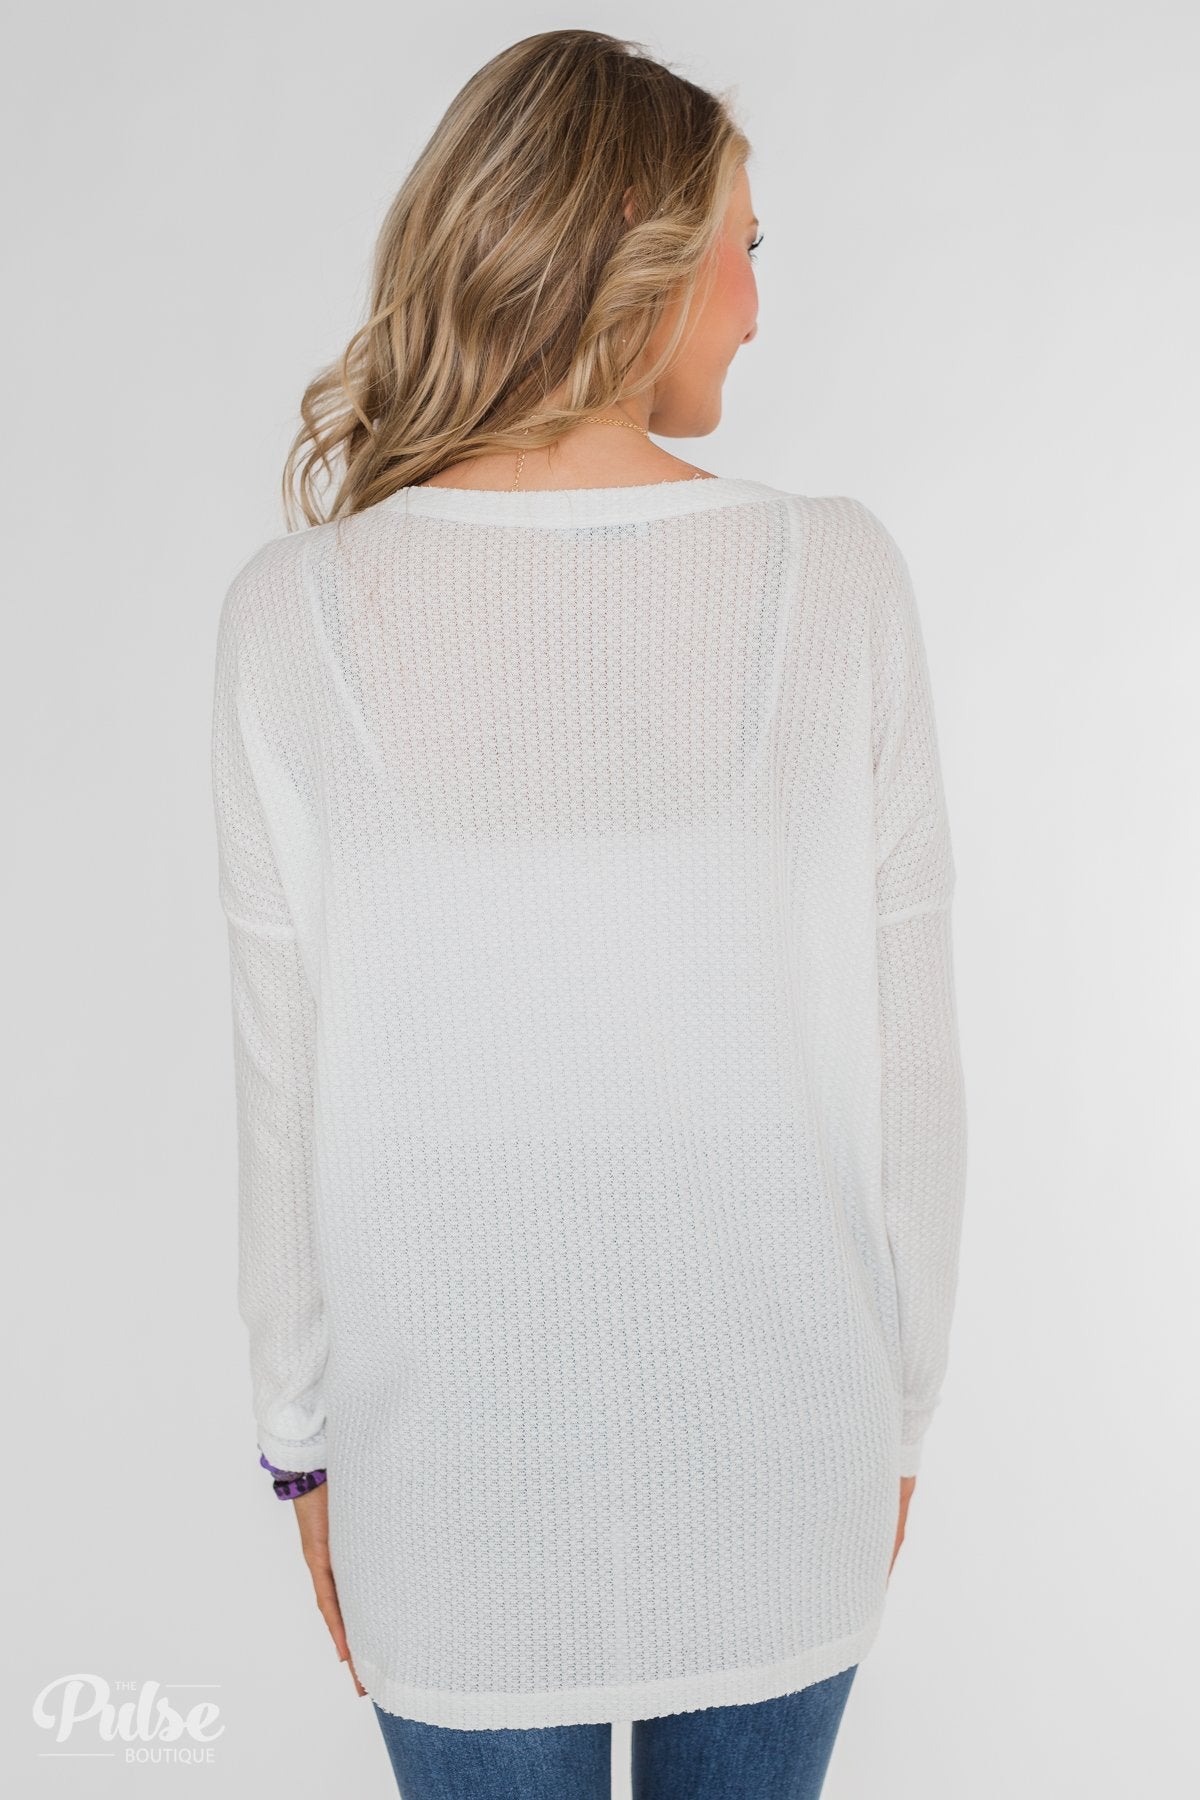 Long Sleeve Button-Up Thermal Top- White